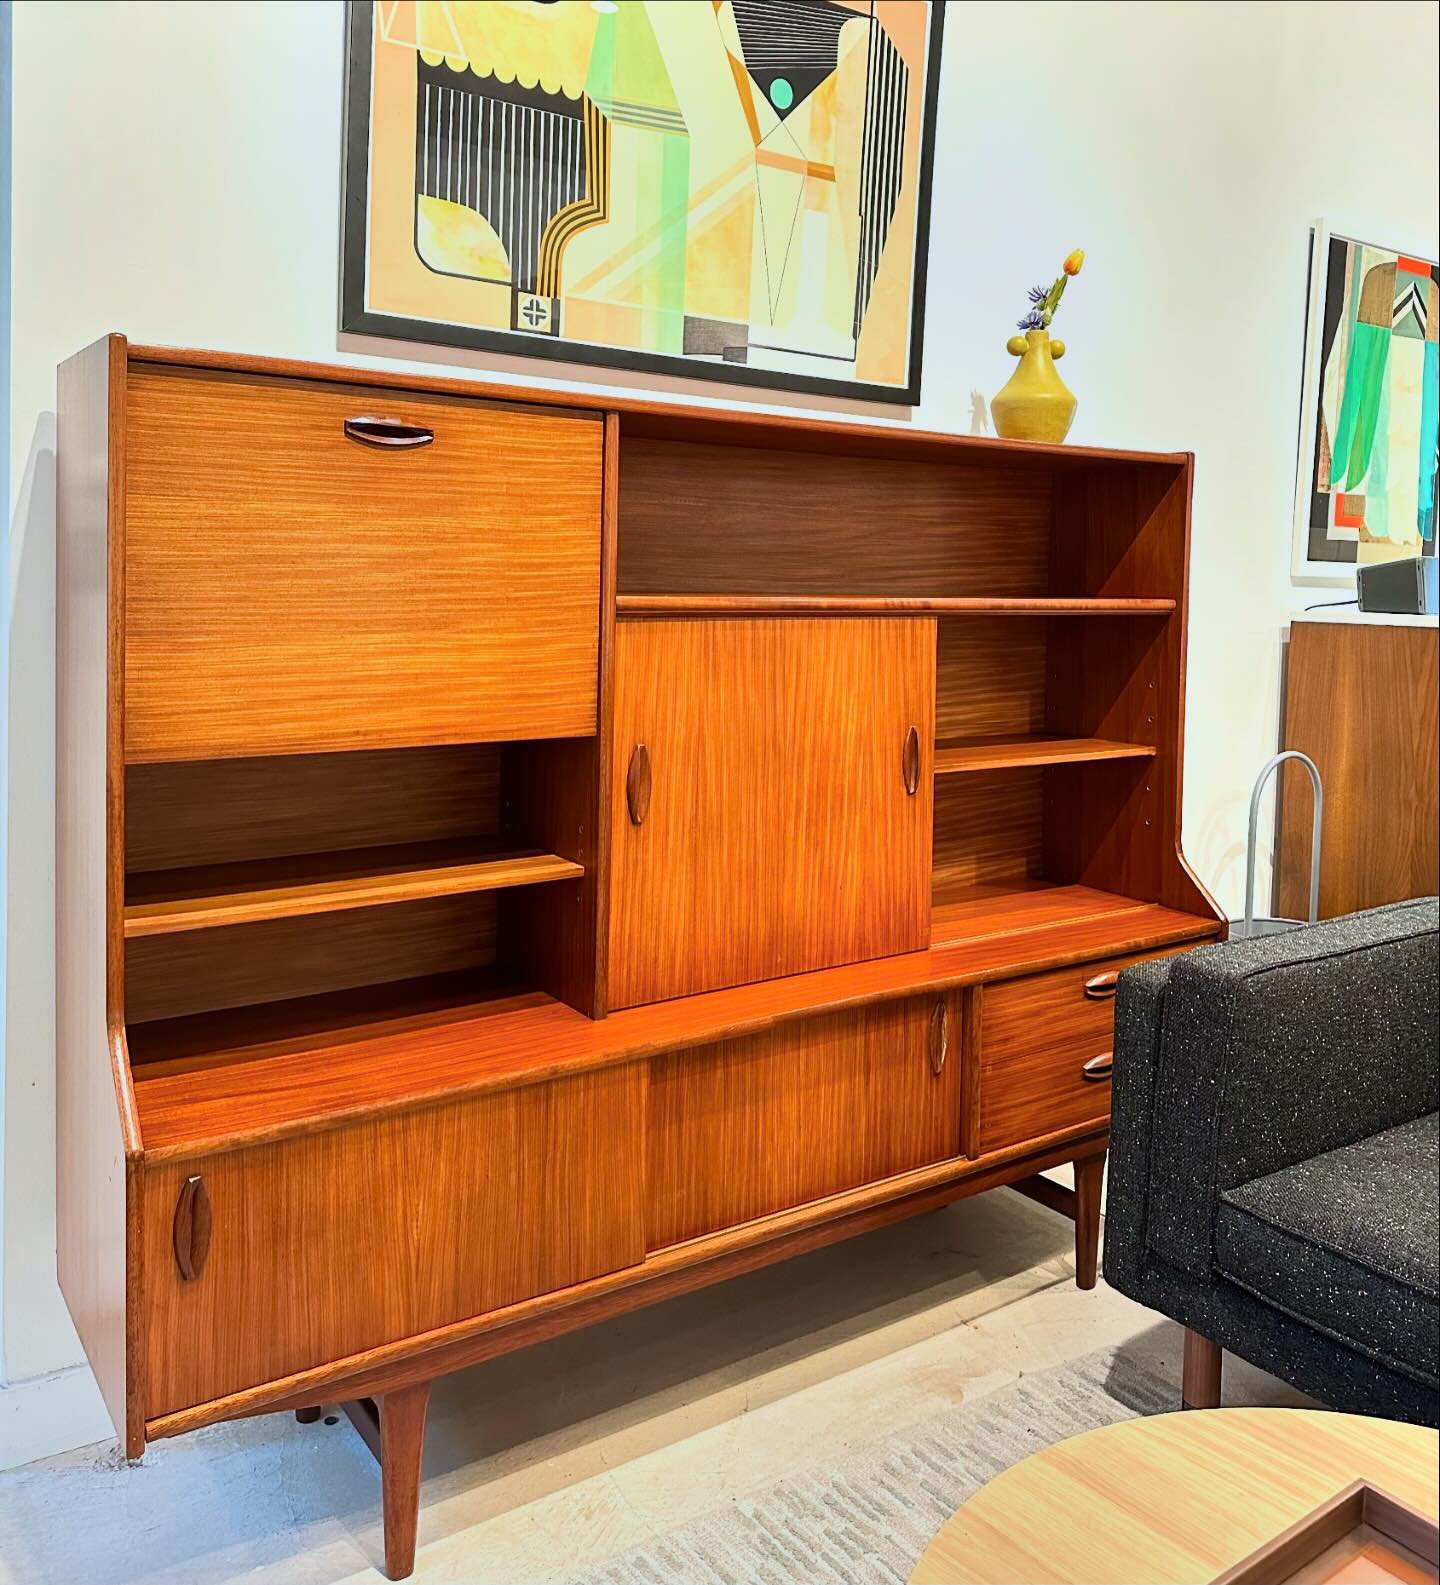 This gorgeous Danish teak piece just arrived! If you&rsquo;re looking for a statement piece, this could be definitely be it.

W72 D16.5 H56

#districtchicago #danishmodern #vintageteak #vintagewallunit #shoplocal